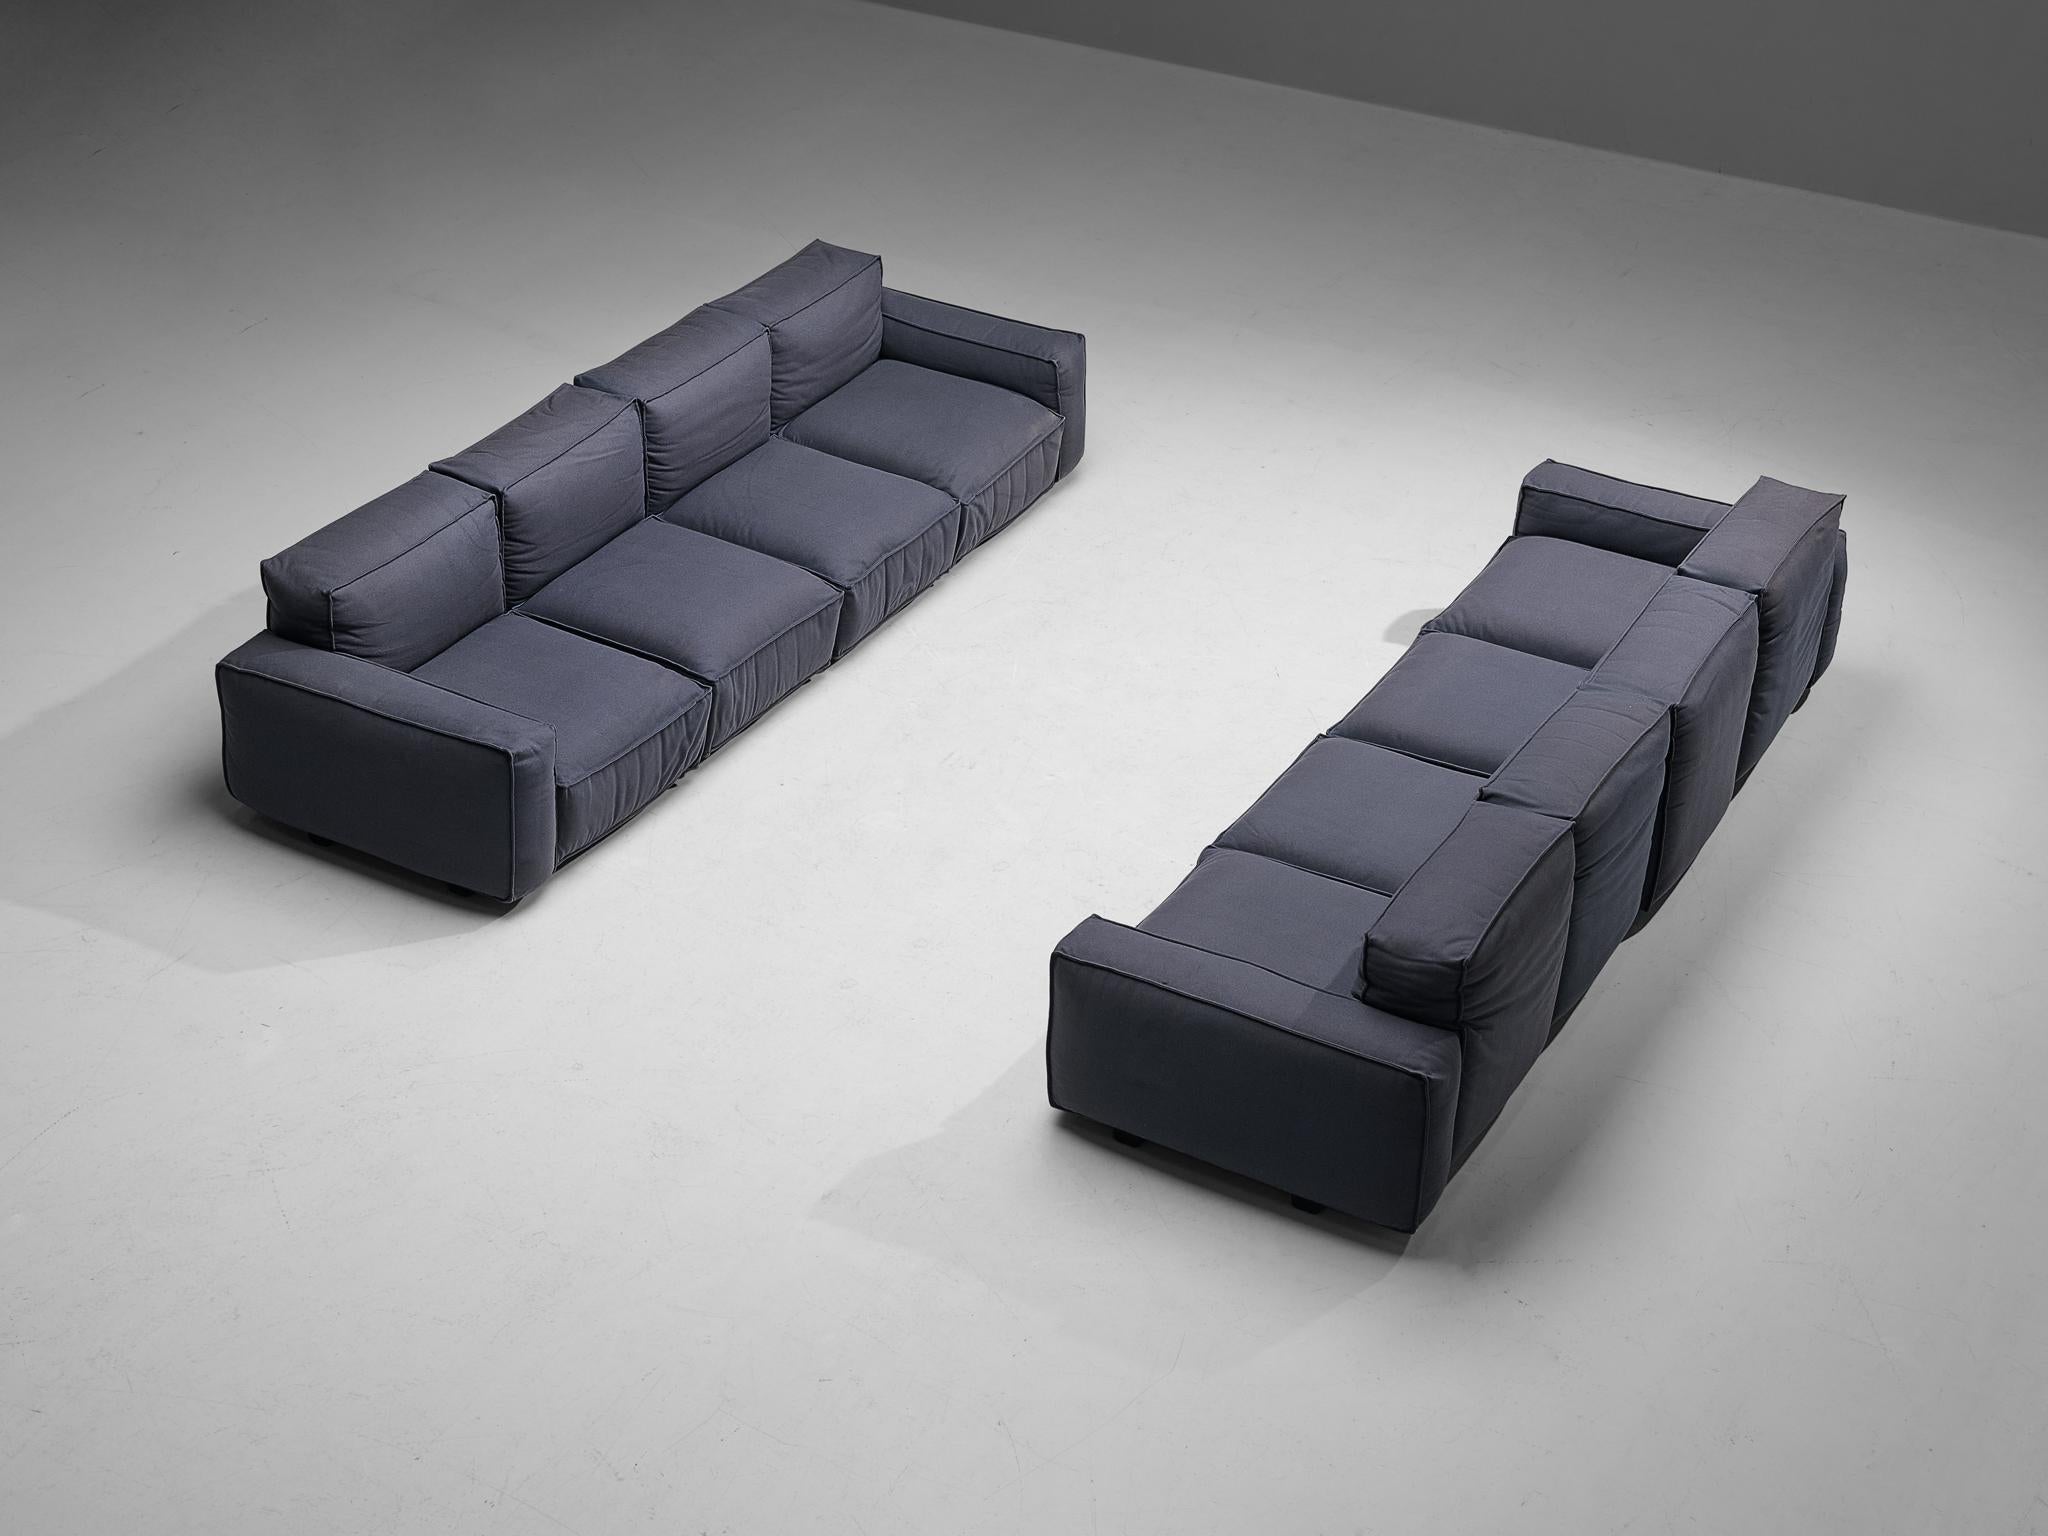 Mario Marenco for Arflex, modular four-seater sofas, model 'Marechiaro', wool, plastic, metal, Italy, circa 1976. 

This well-designed pair of sofas by Mario Marenco for Arflex is fully executed in deep blue wool upholstery that contributes to the